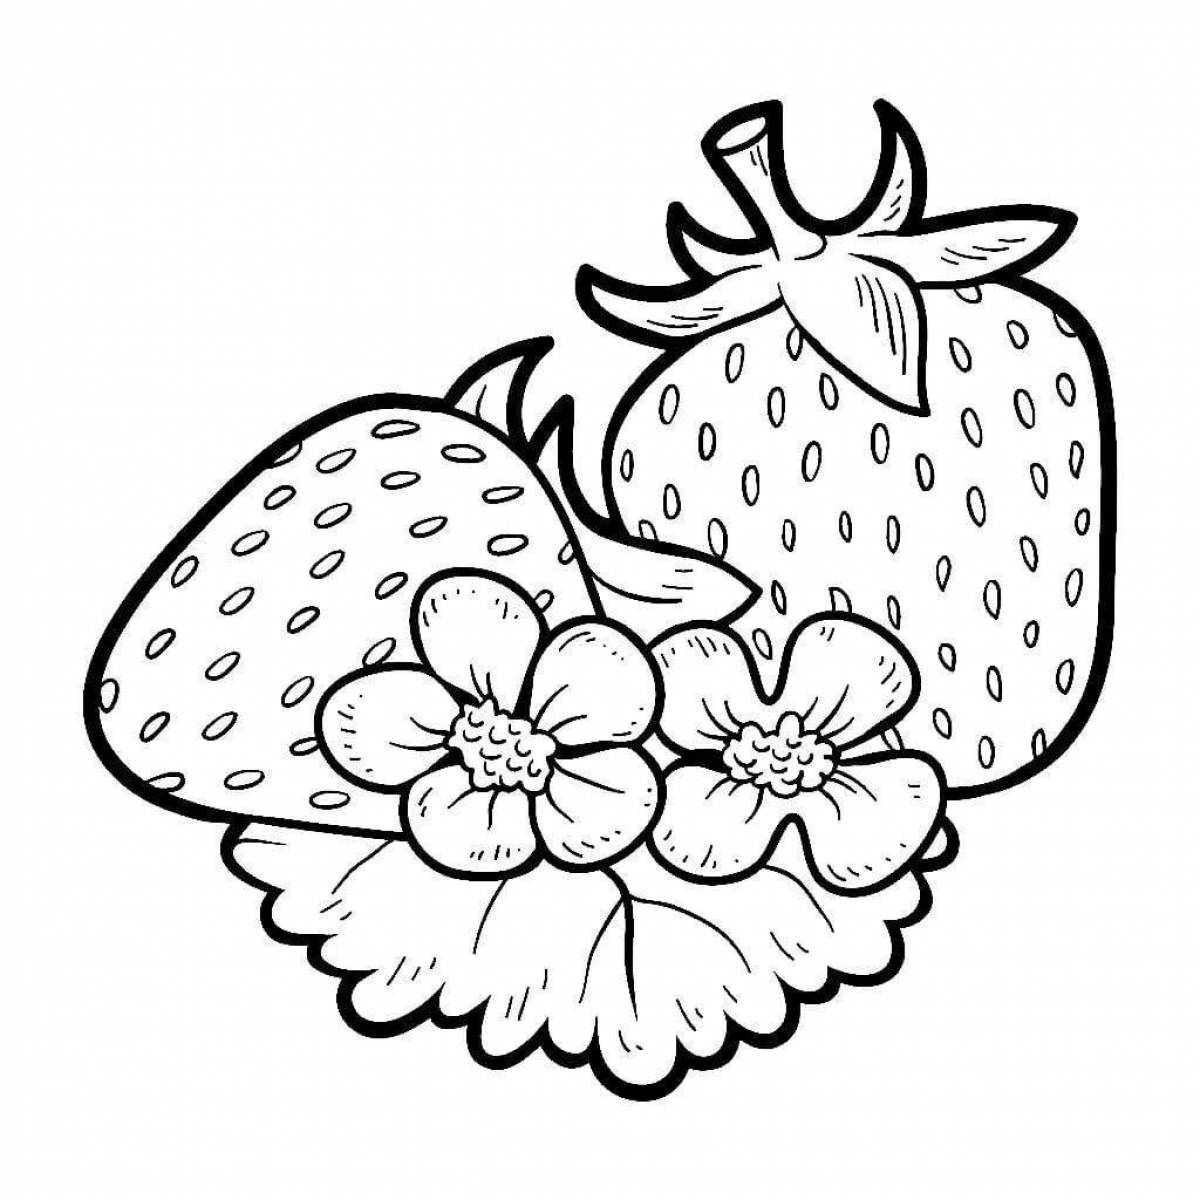 Delicious strawberry coloring game